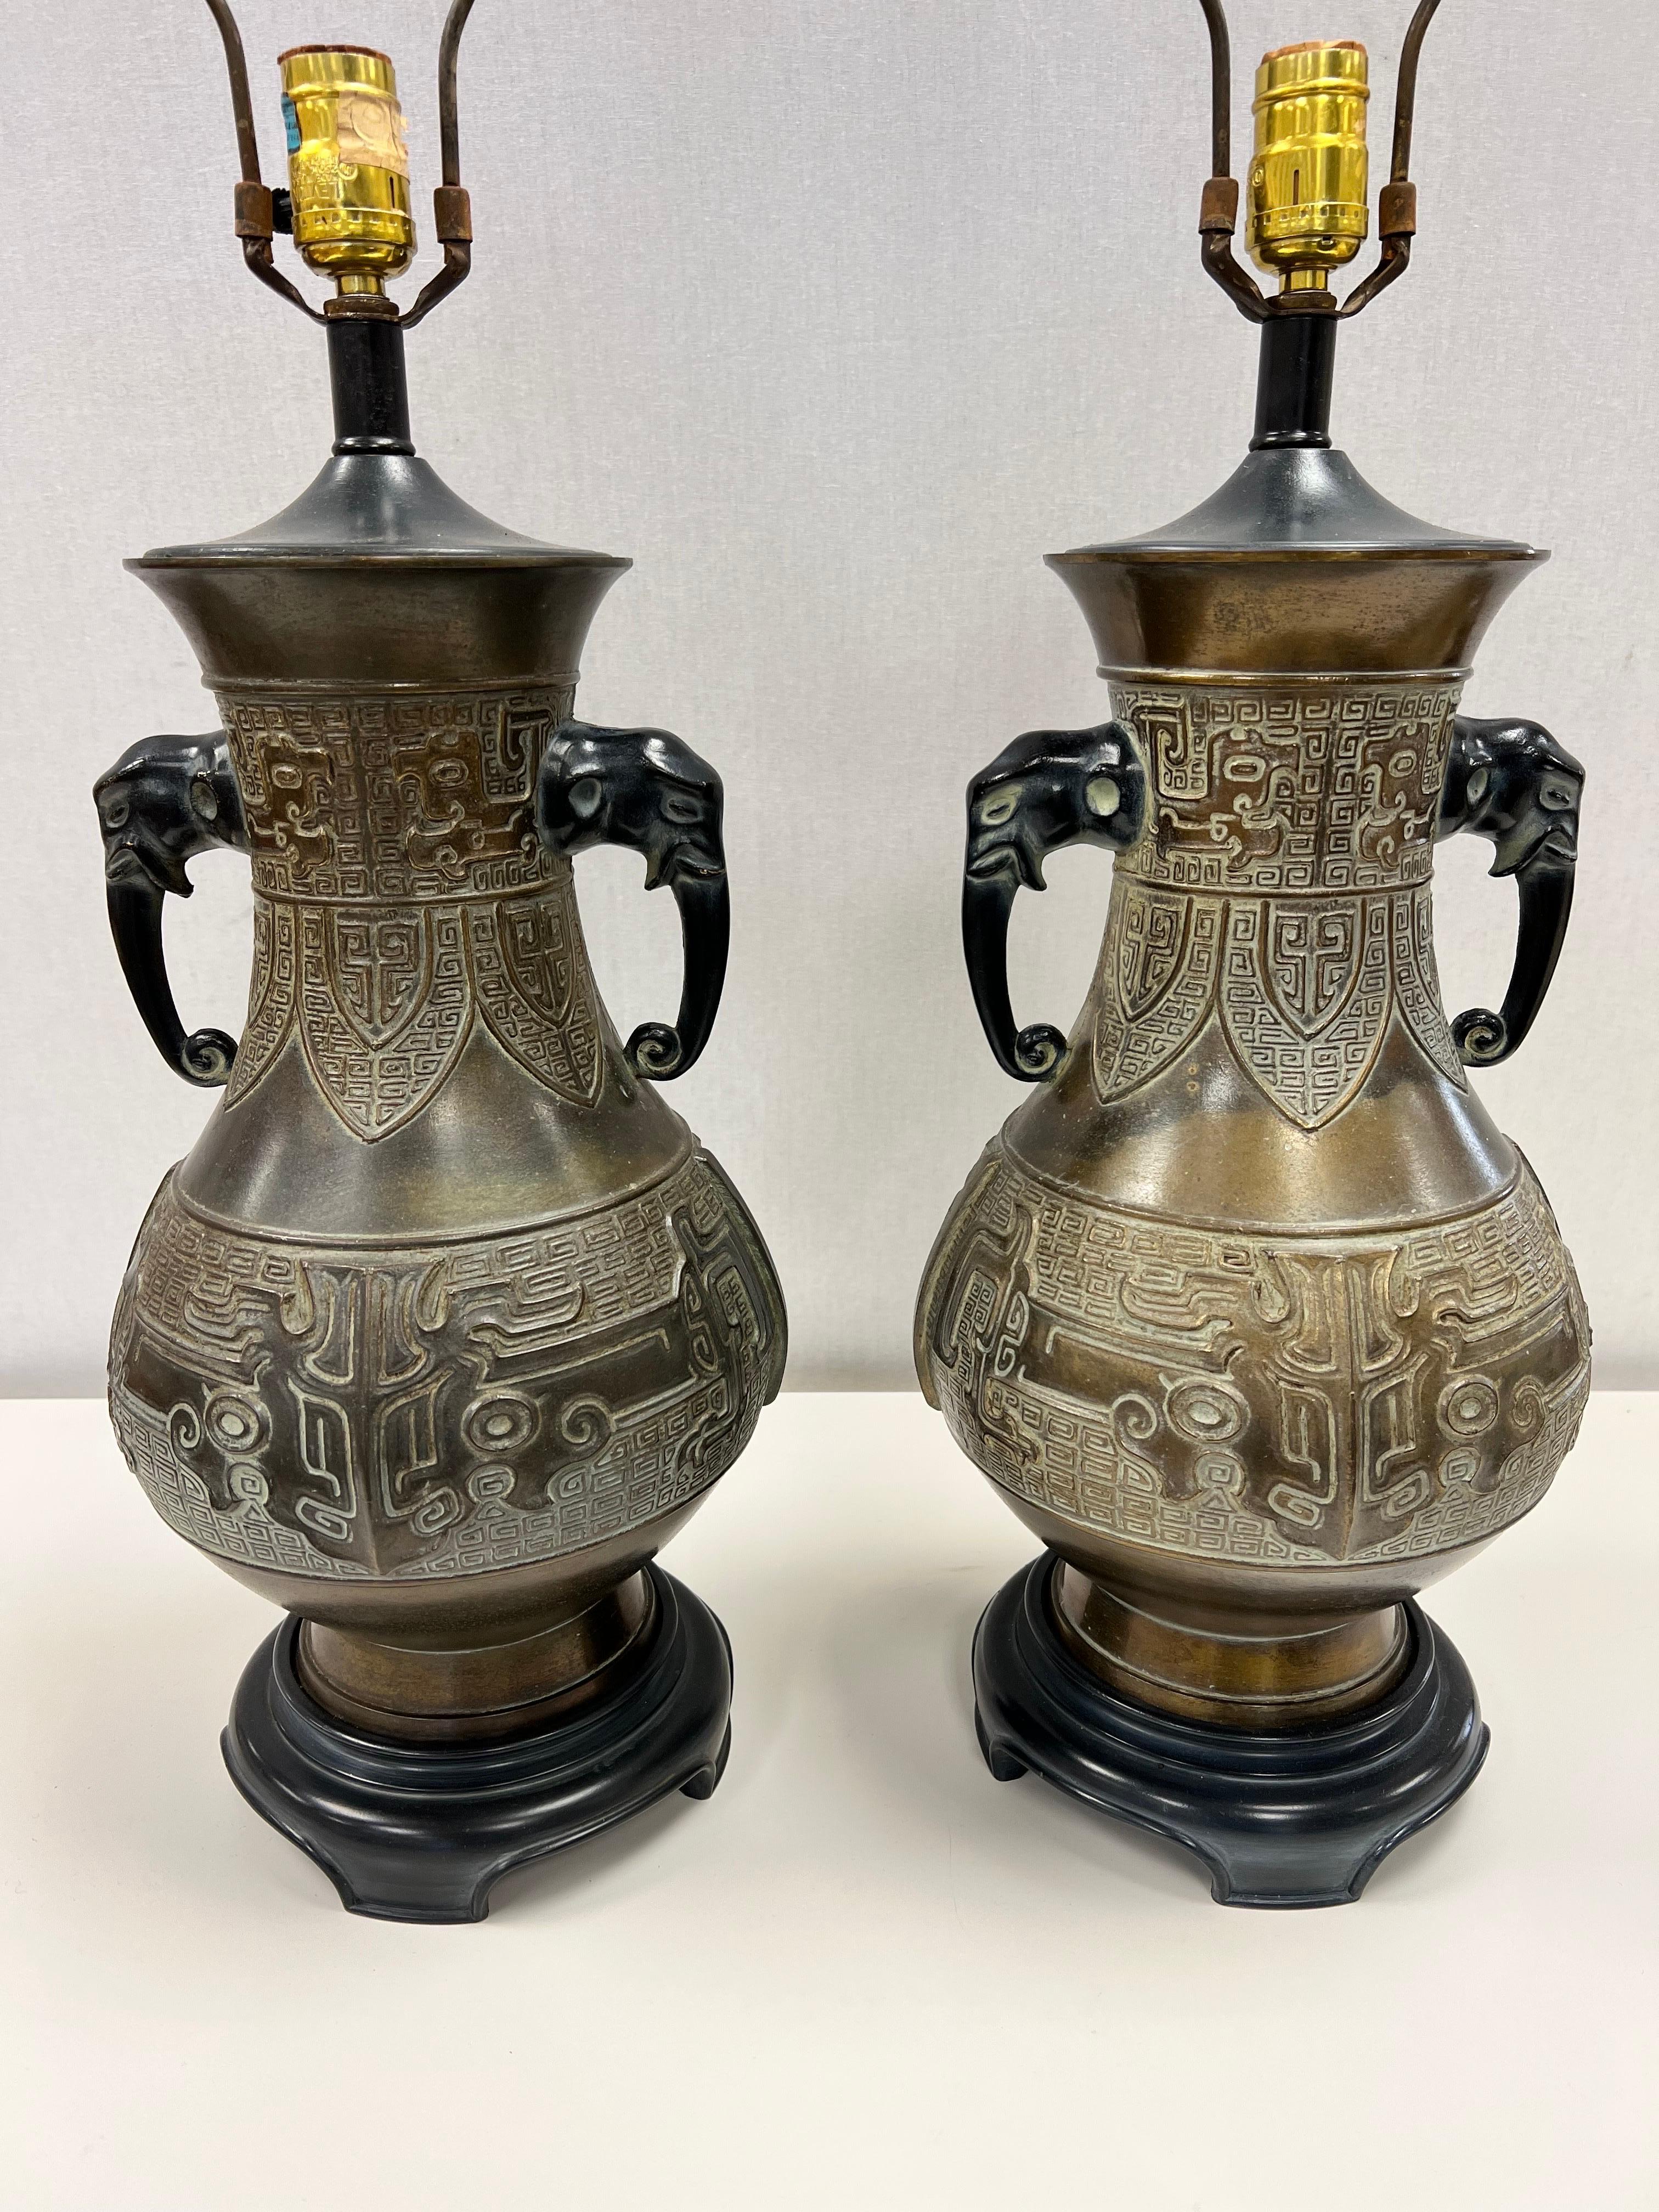 Vintage Chinese archaistic urn form lamps having molded geometric designs and elephant handles. 22.5”h to top of socket.